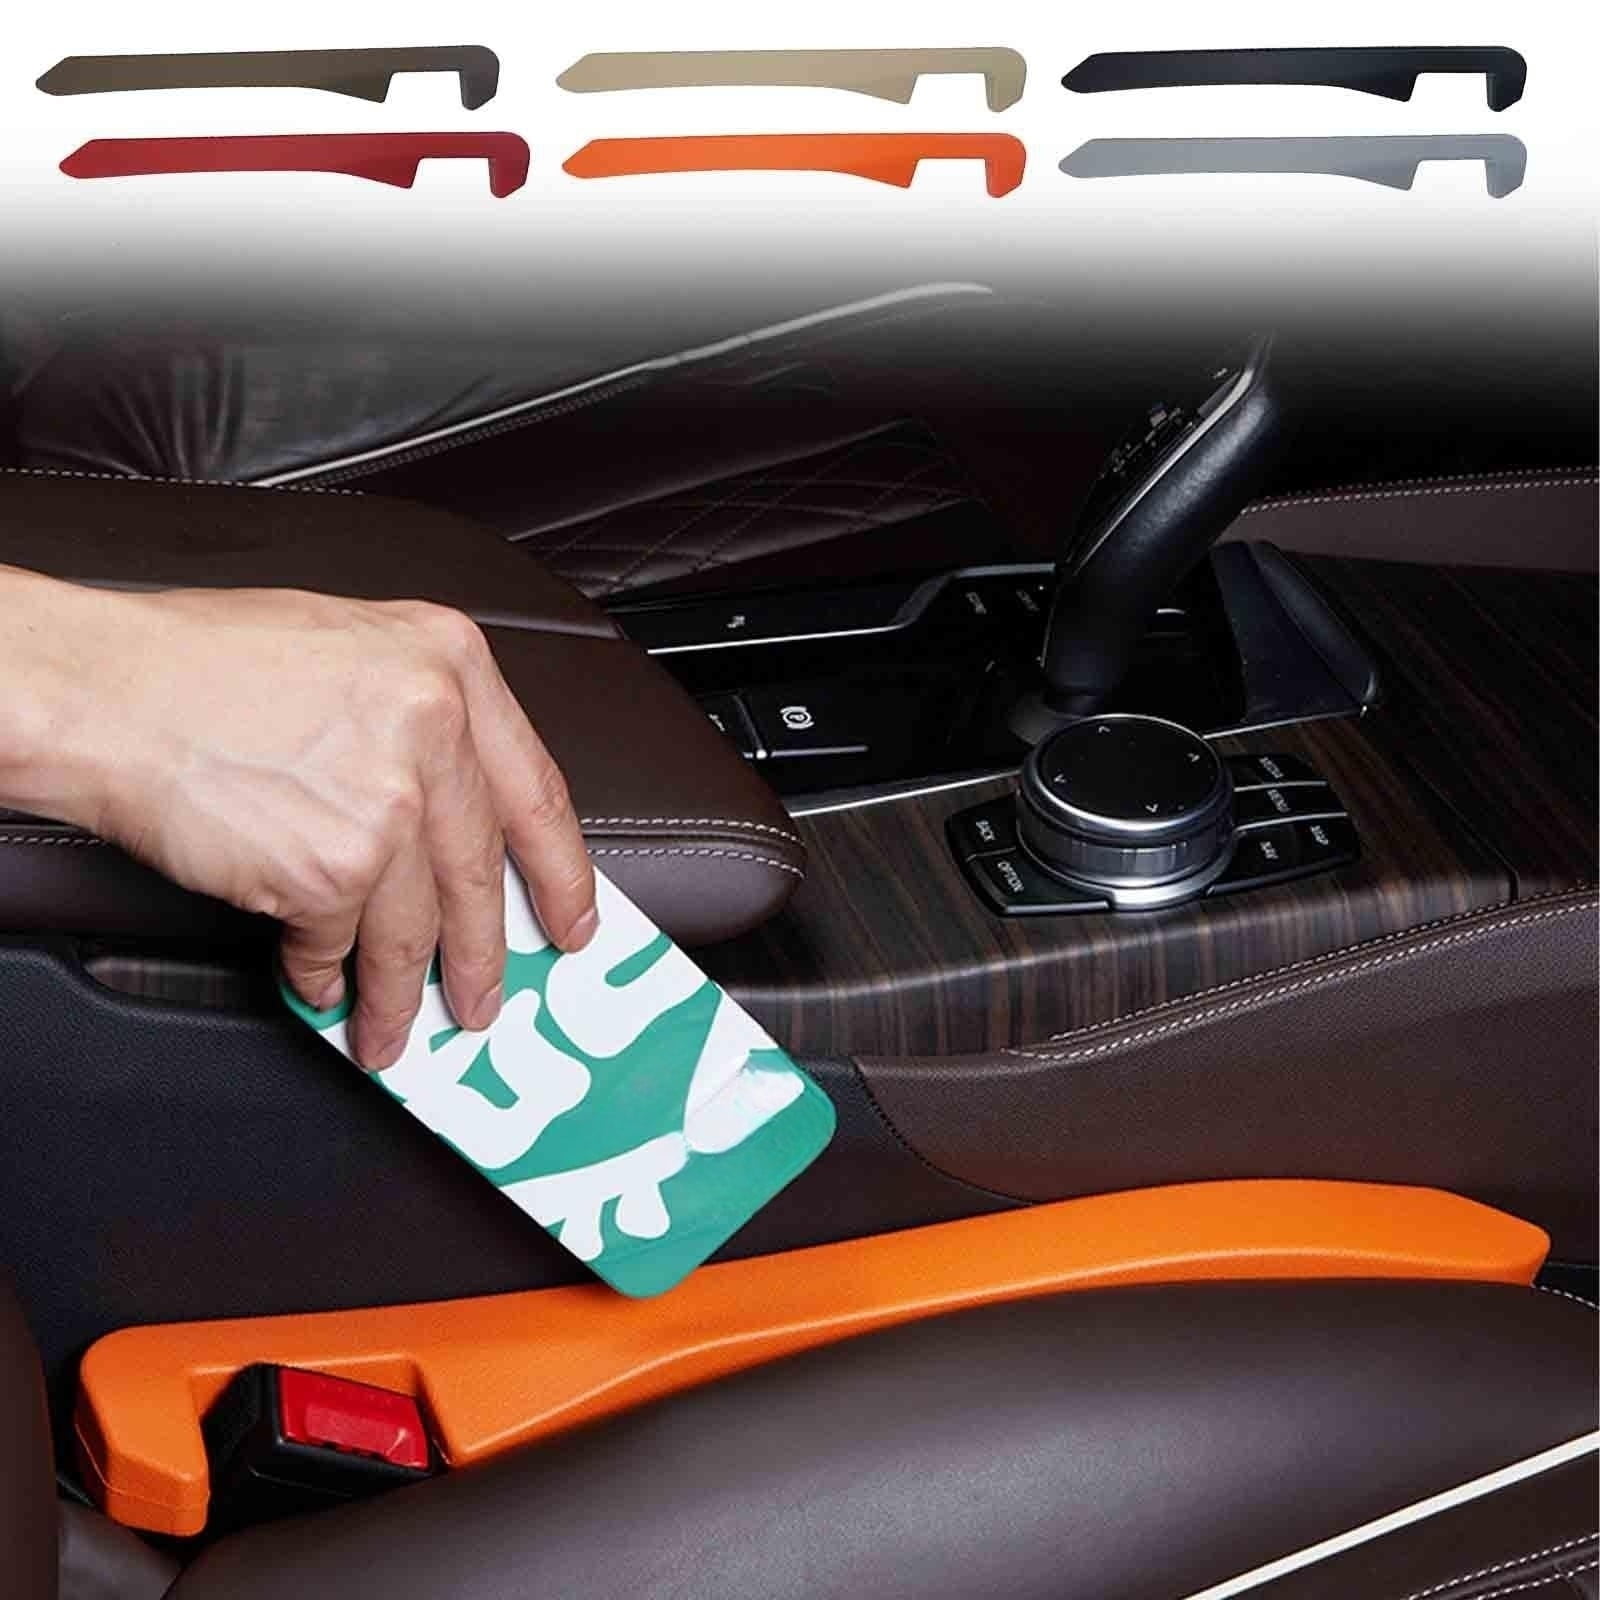 BESULEN Leather Seat Gap Filler, Fill The Gap Between Seat and Console, Car  Crevice Catcher Blocker Stop Things from Dropping, 2 Pack Universal Gap